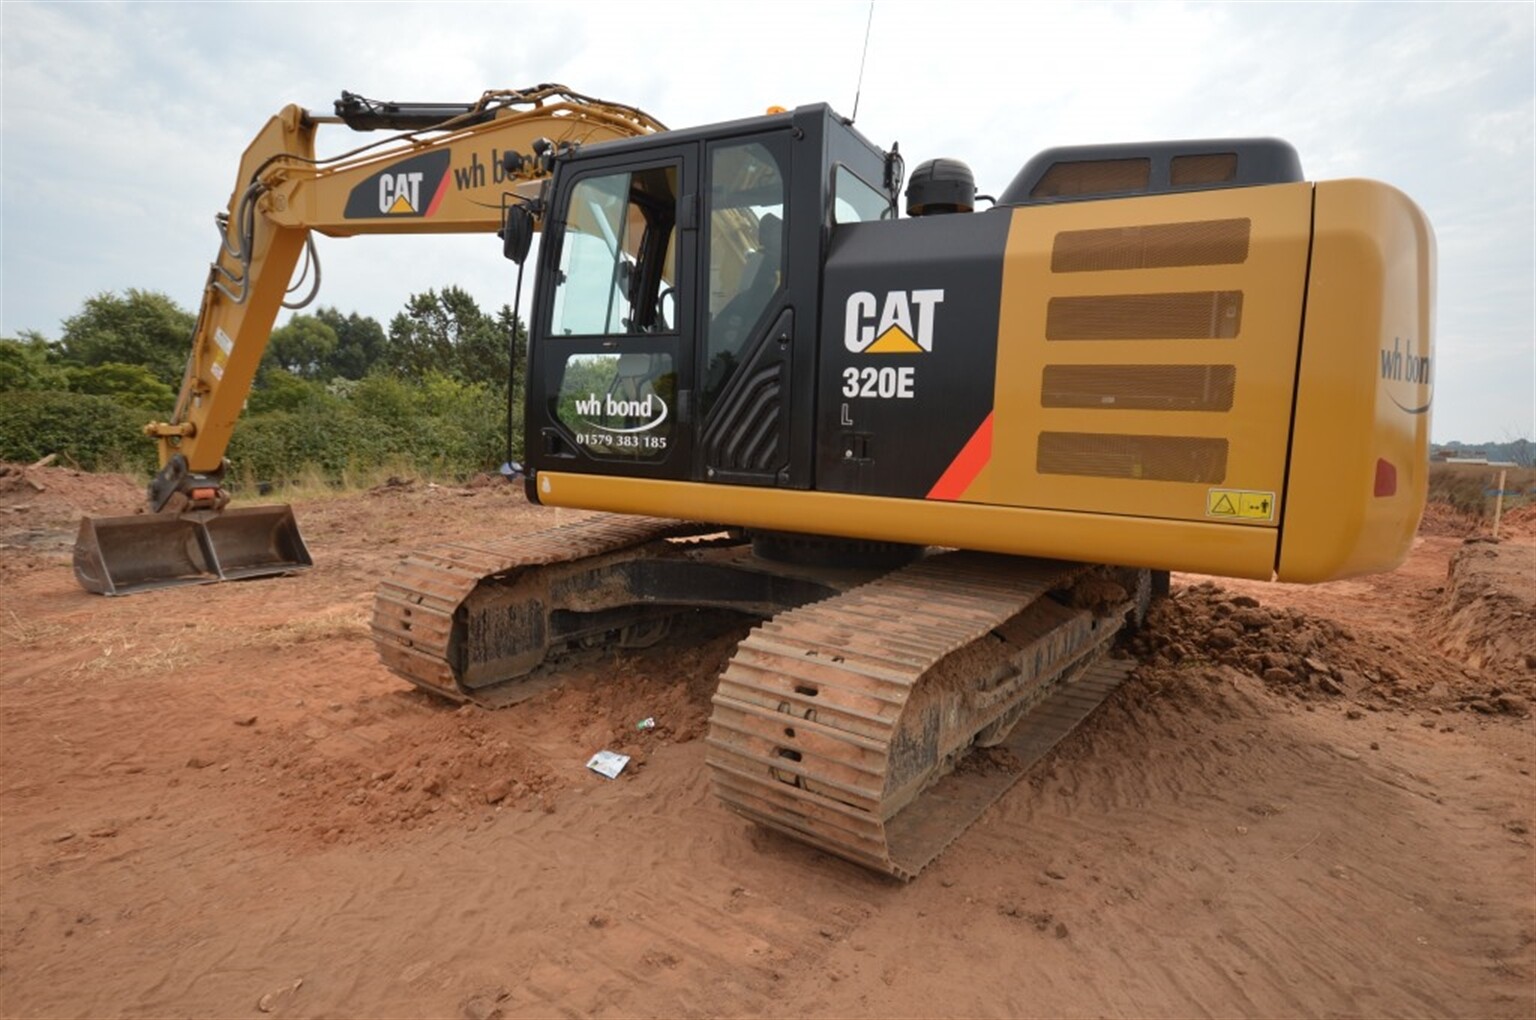 Digger puts the Cat E series to work